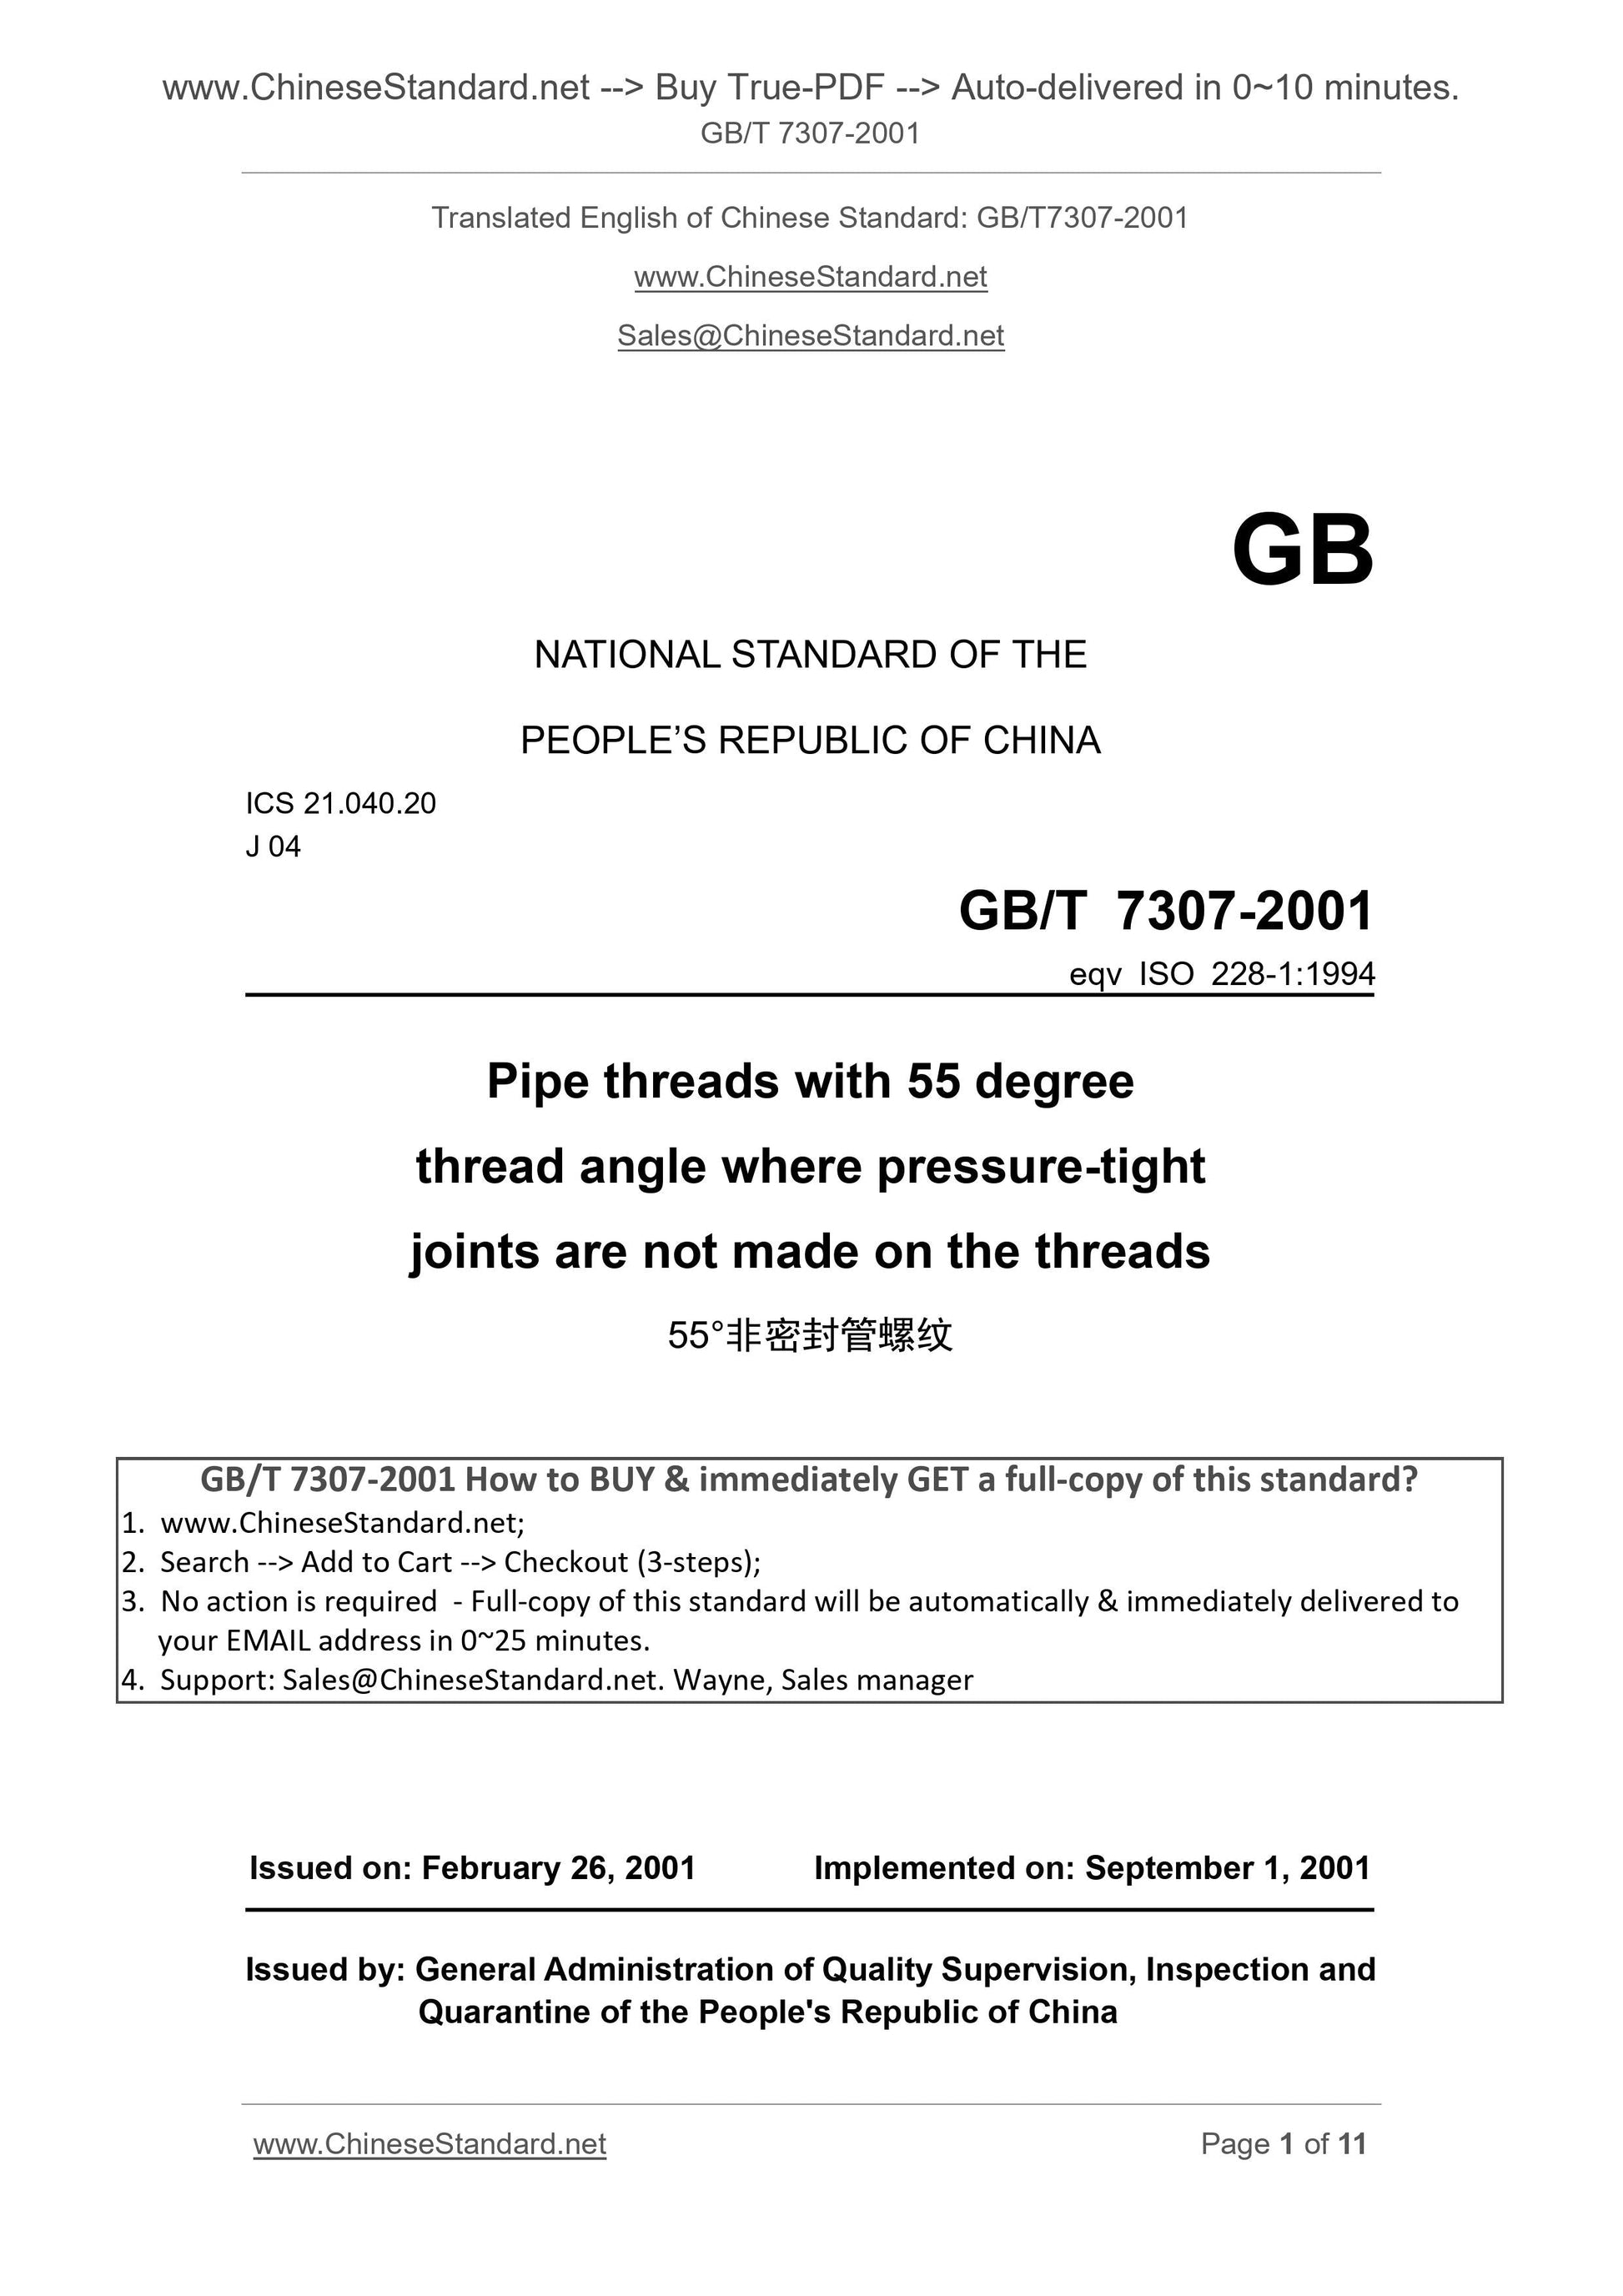 GB/T 7307-2001 Page 1